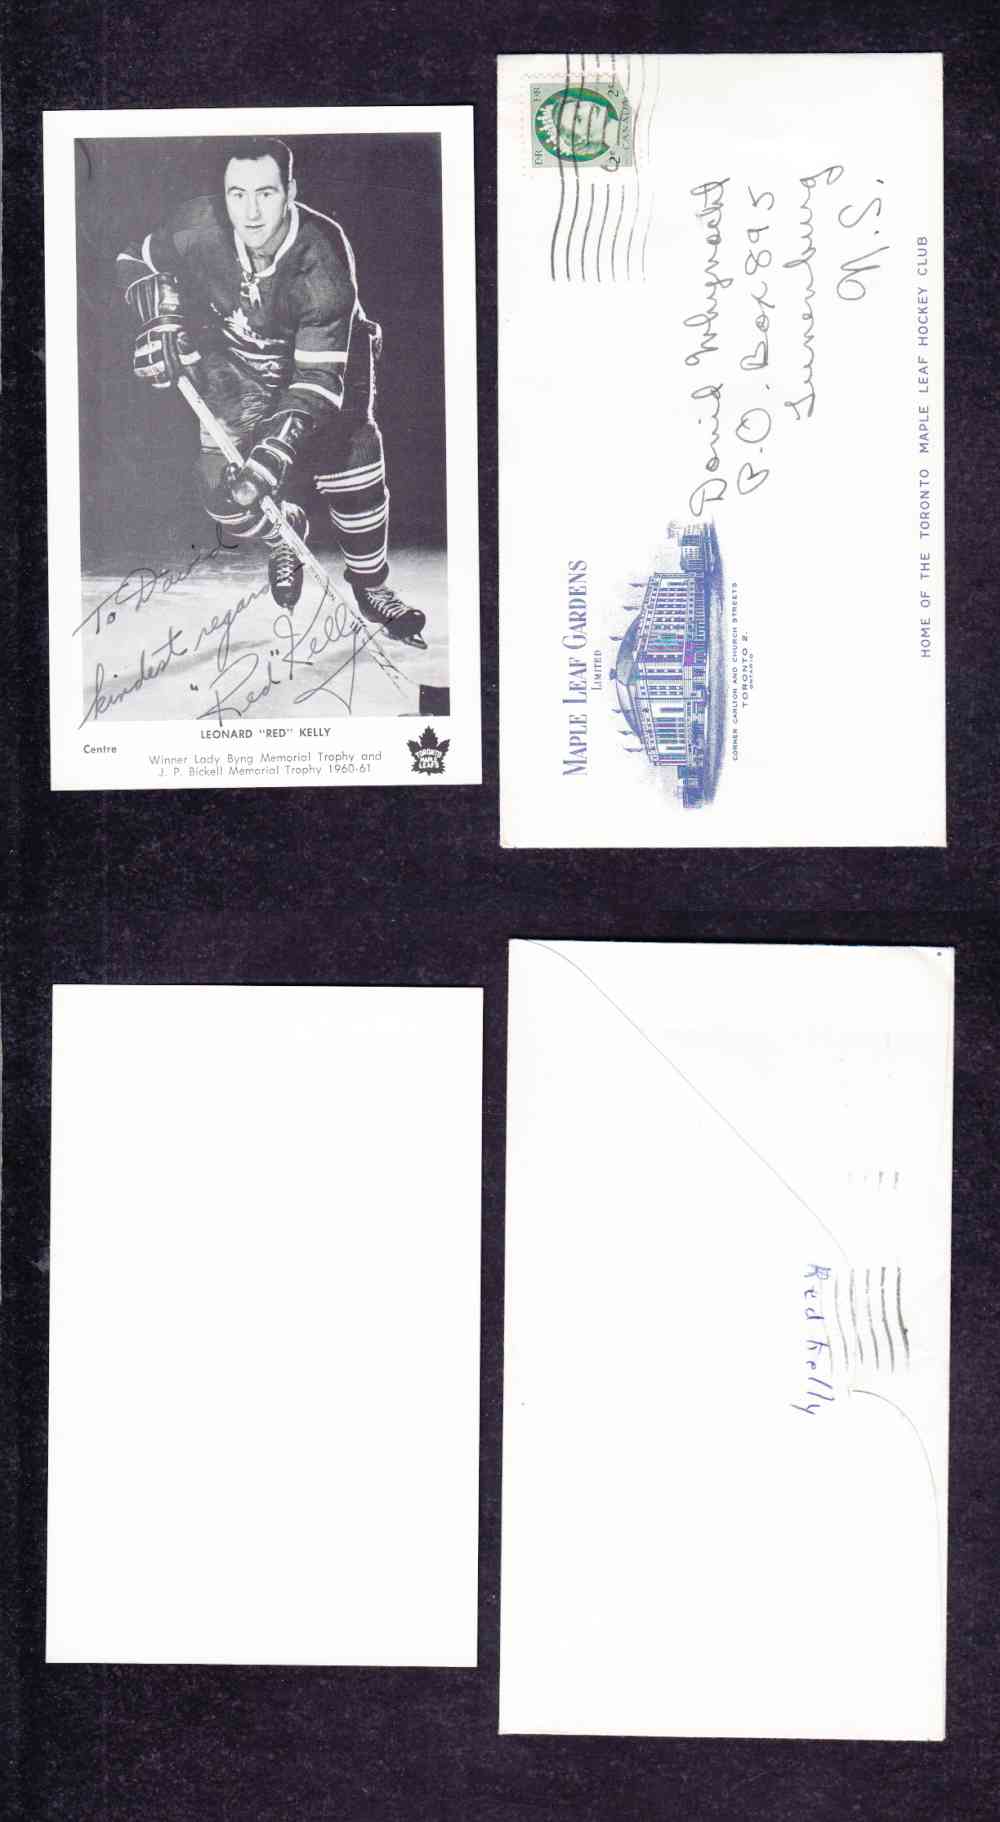 1960 'S TORONTO MAPLE LEAFS R.KELLY  AUTOGRAPHED POST CARD photo